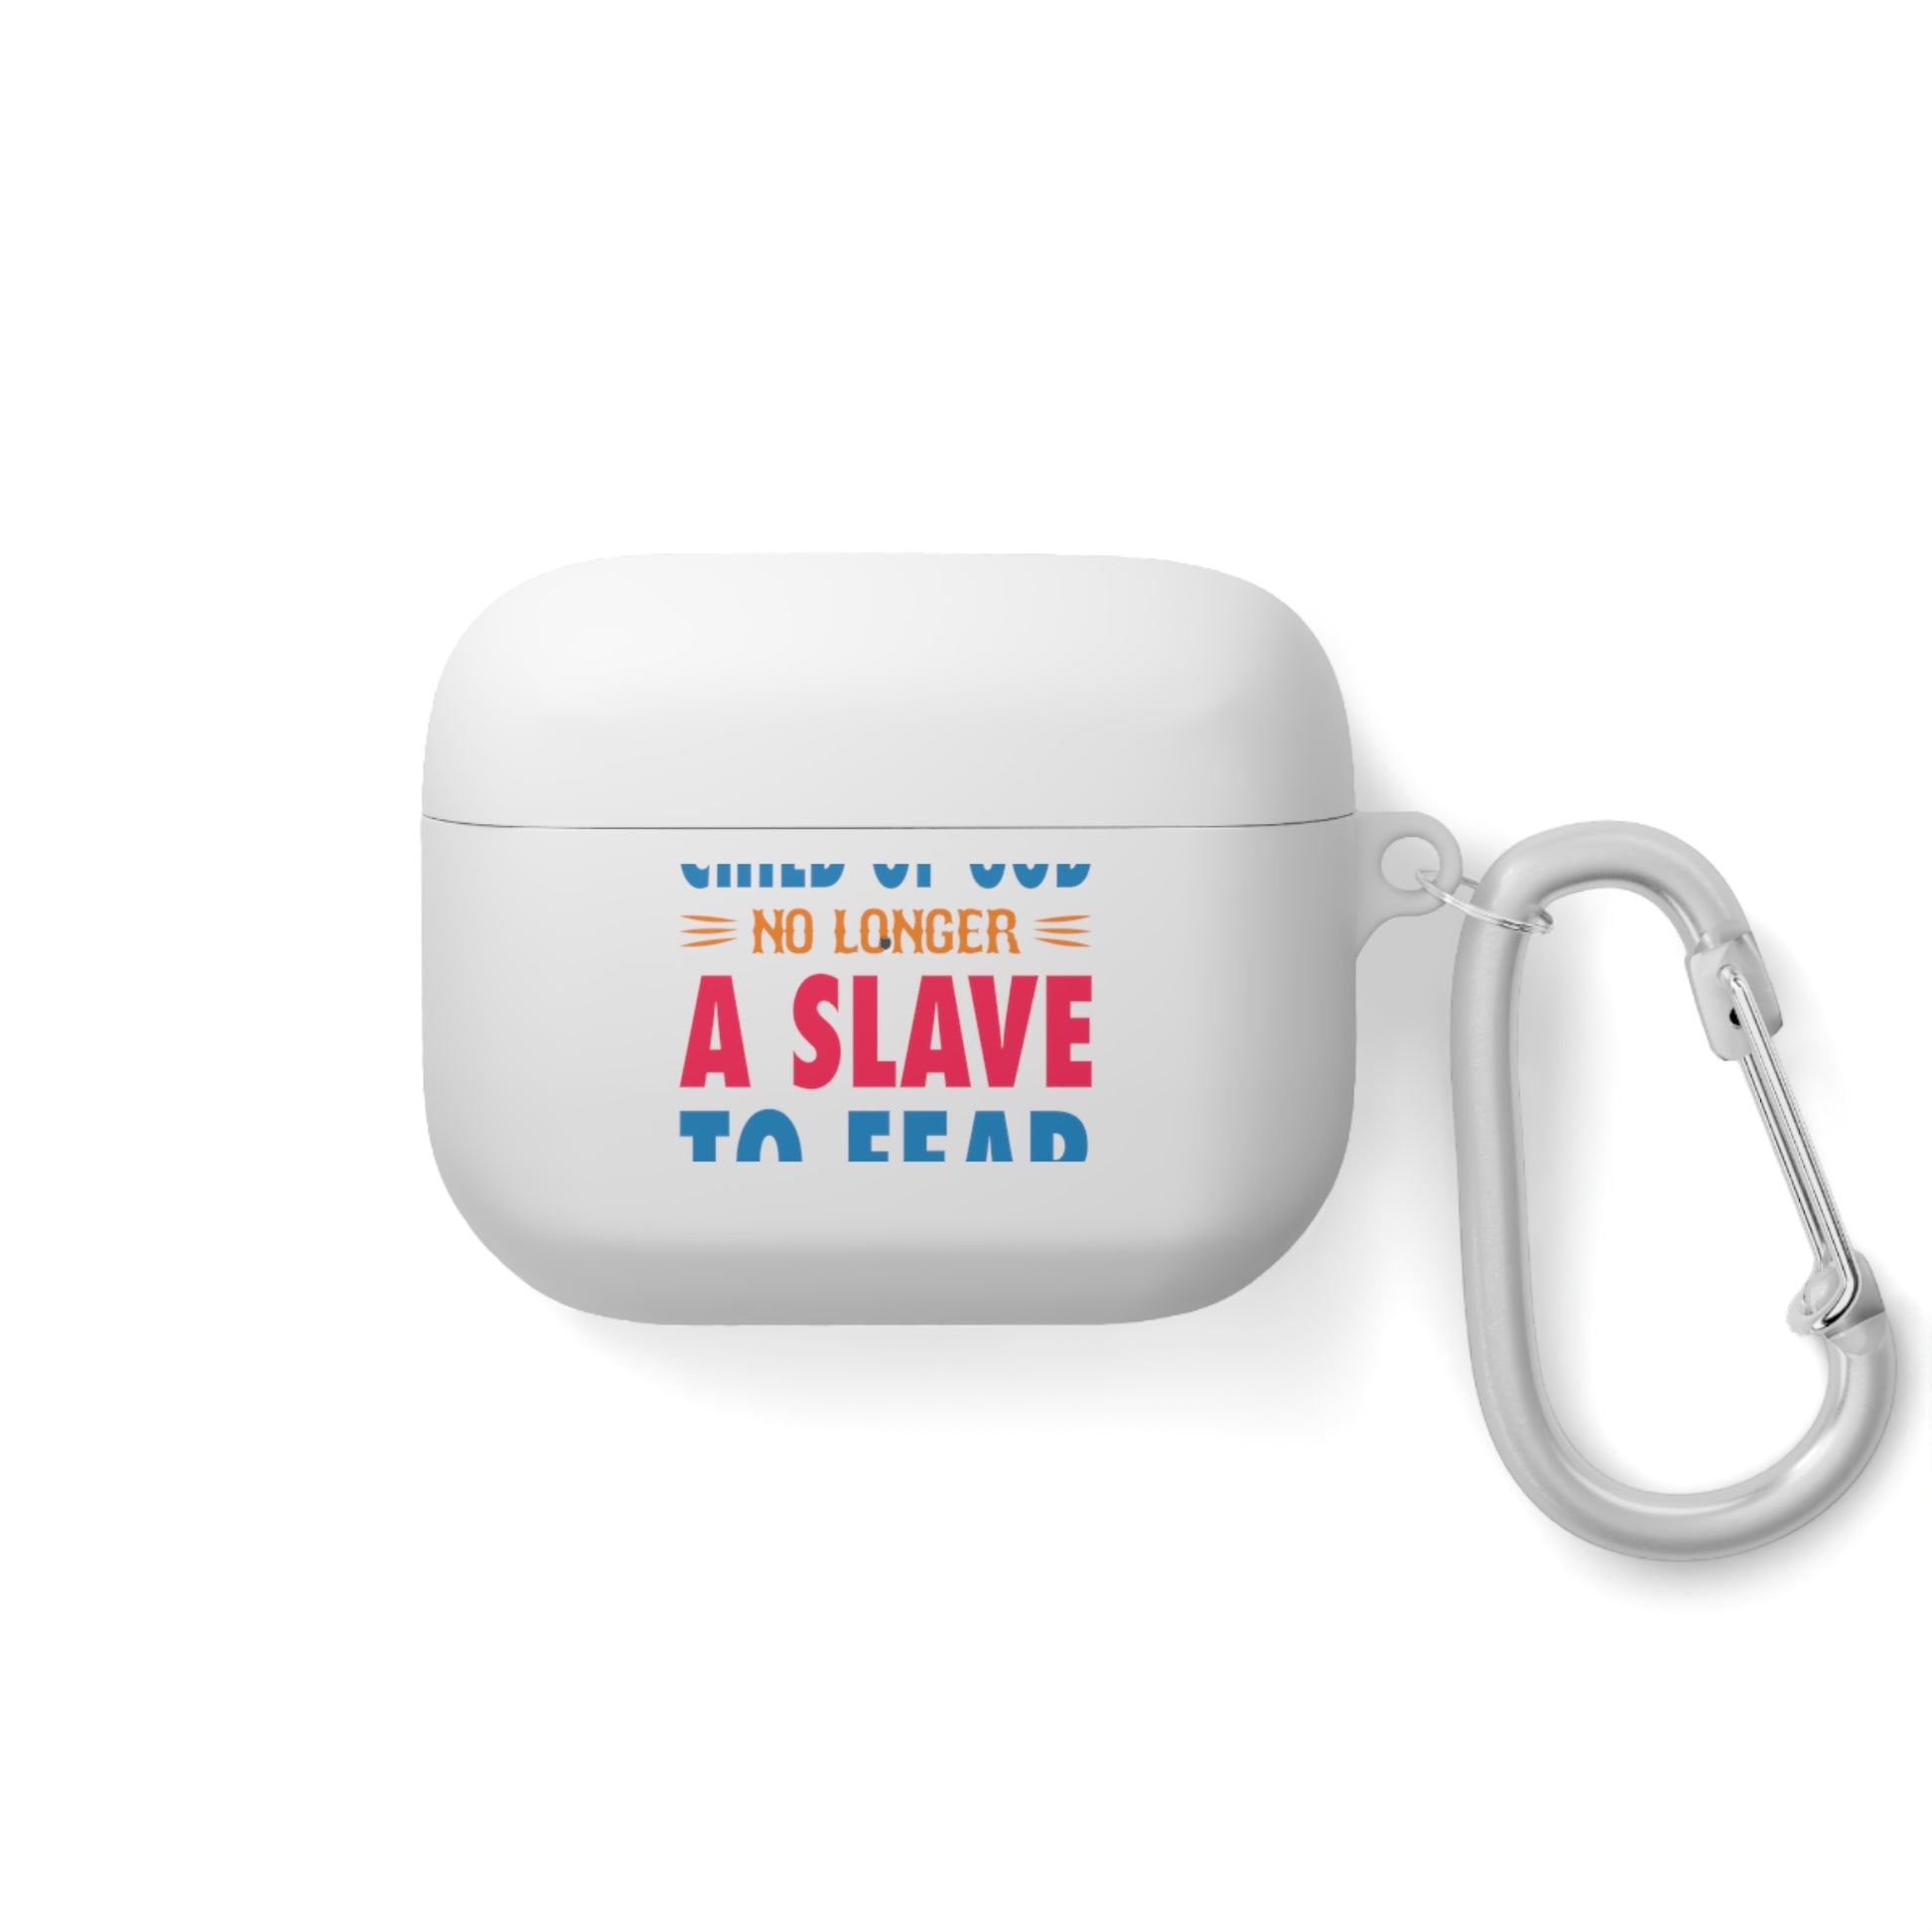 Child Of God No Longer A Slave To Fear Christian Airpod / Airpods Pro Case cover Printify